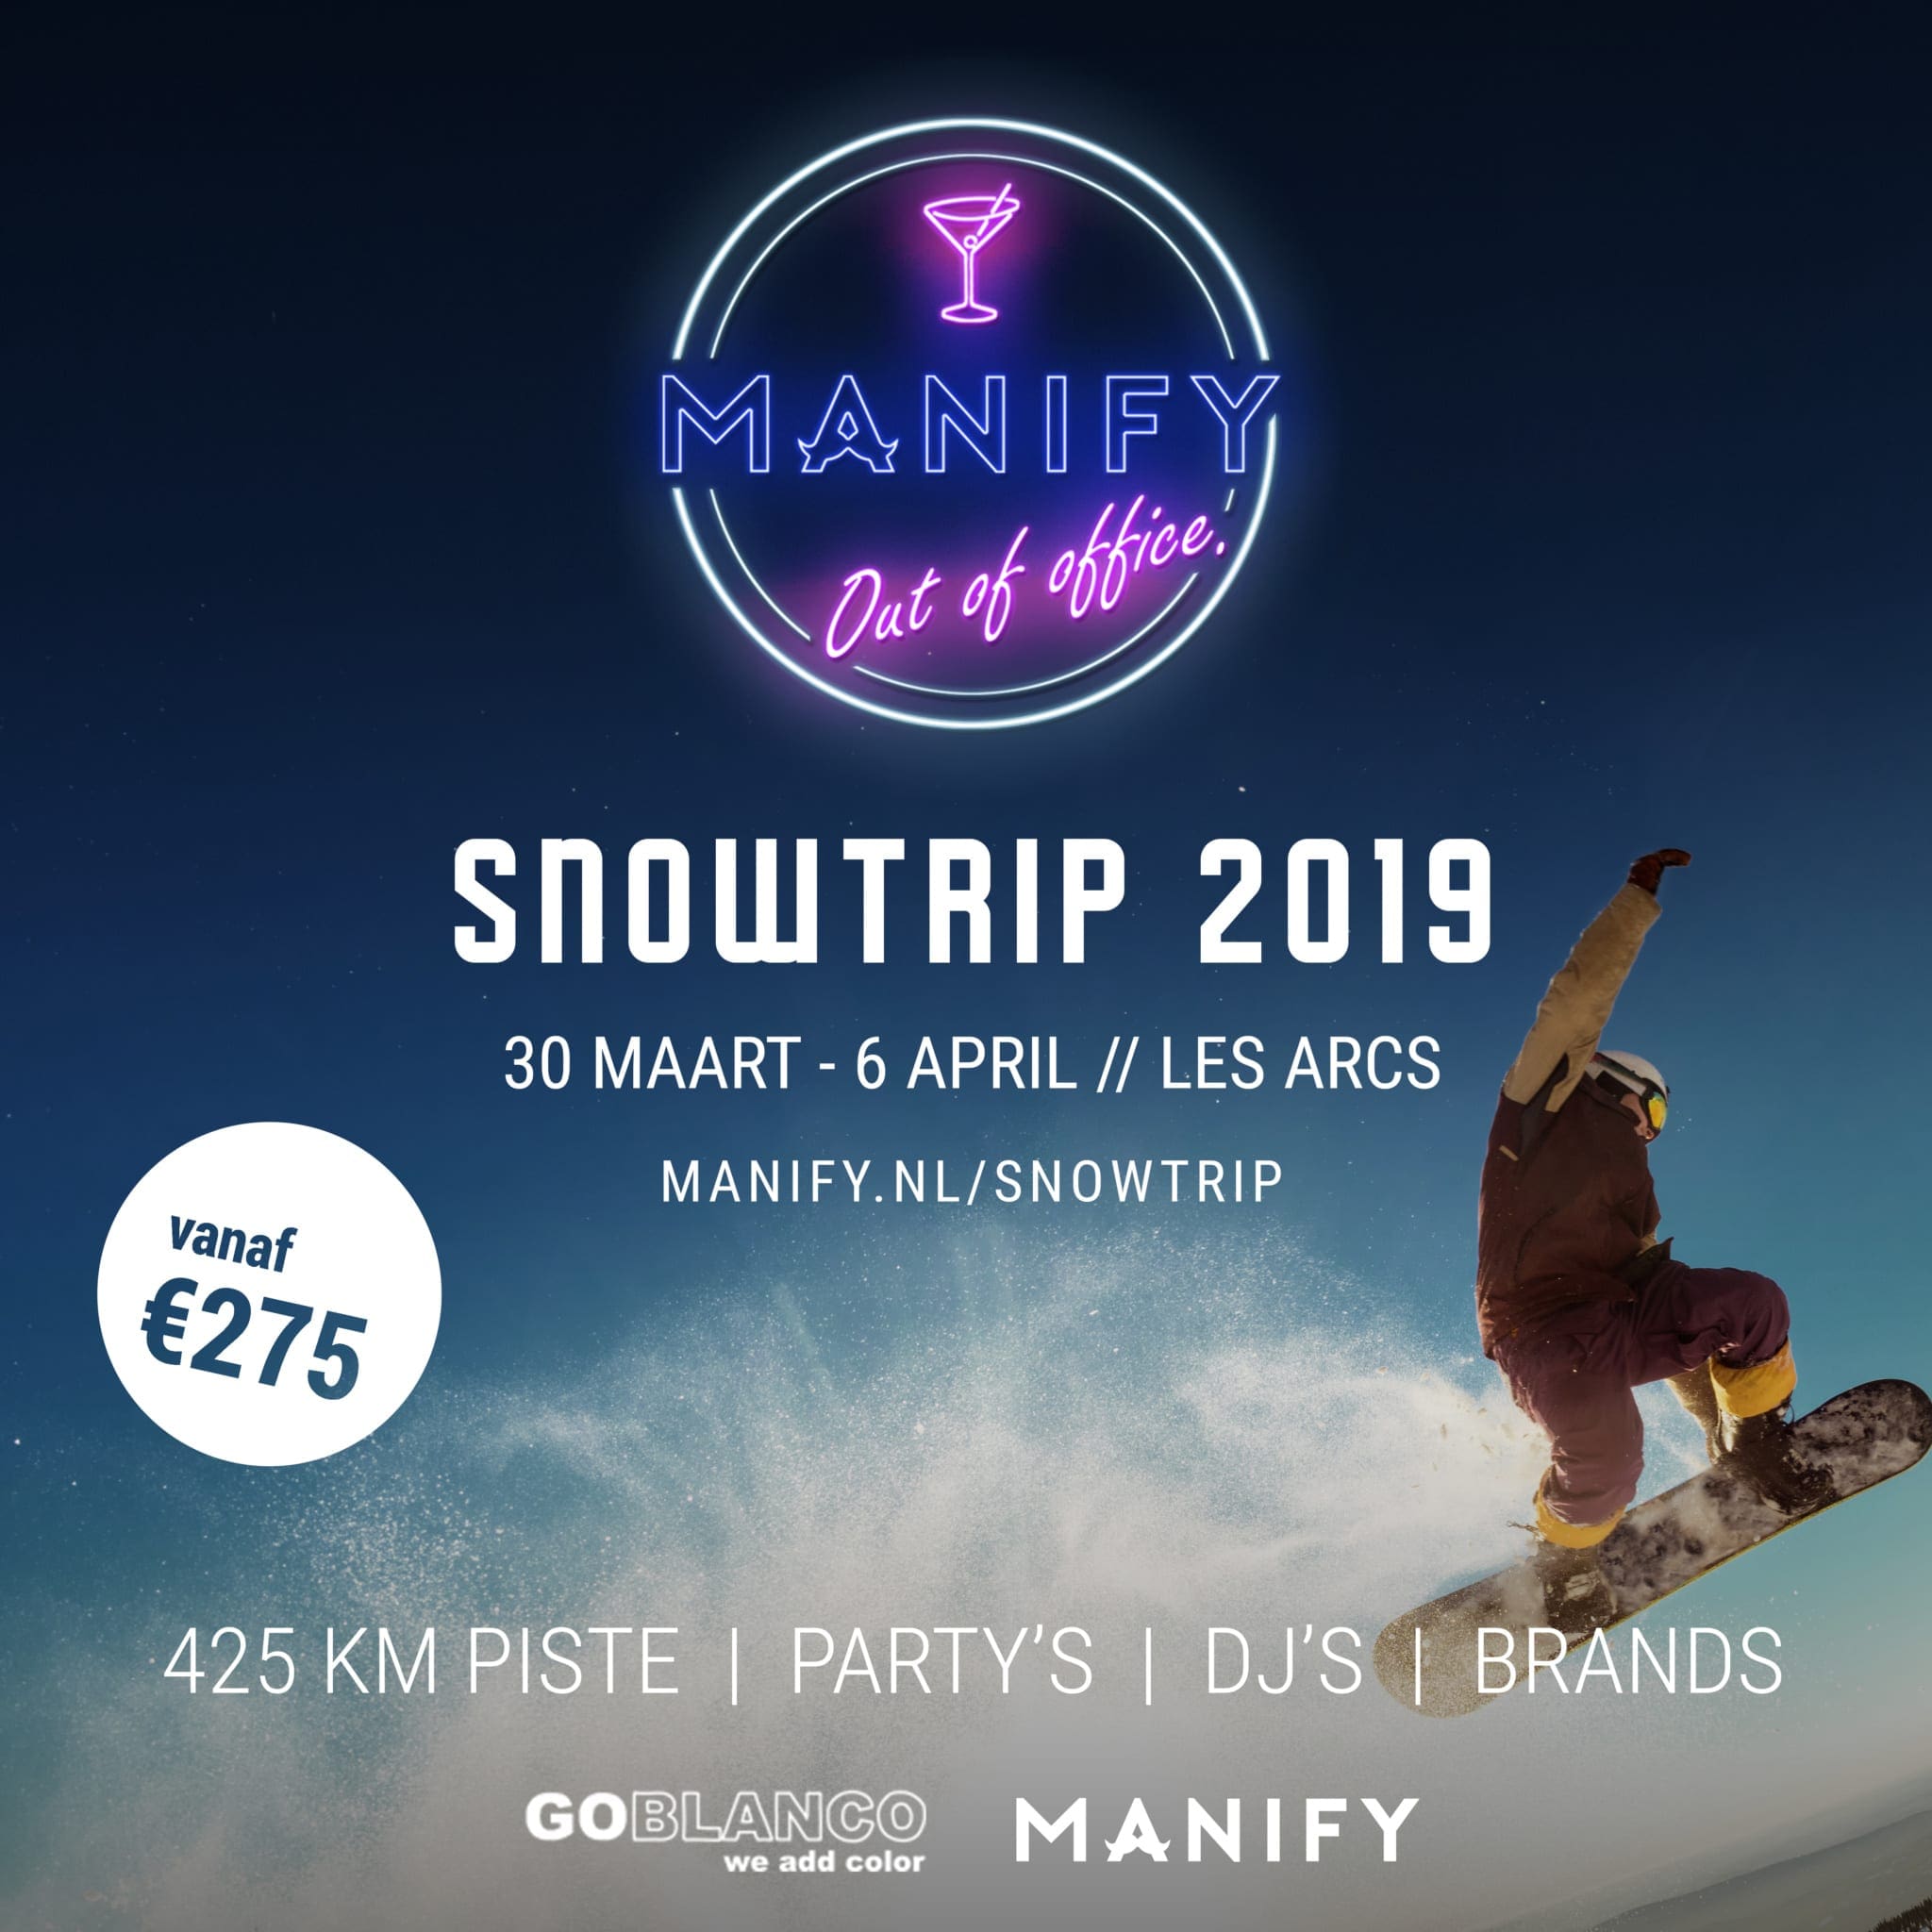 , MANIFY: Out of office Snowtrip 2019